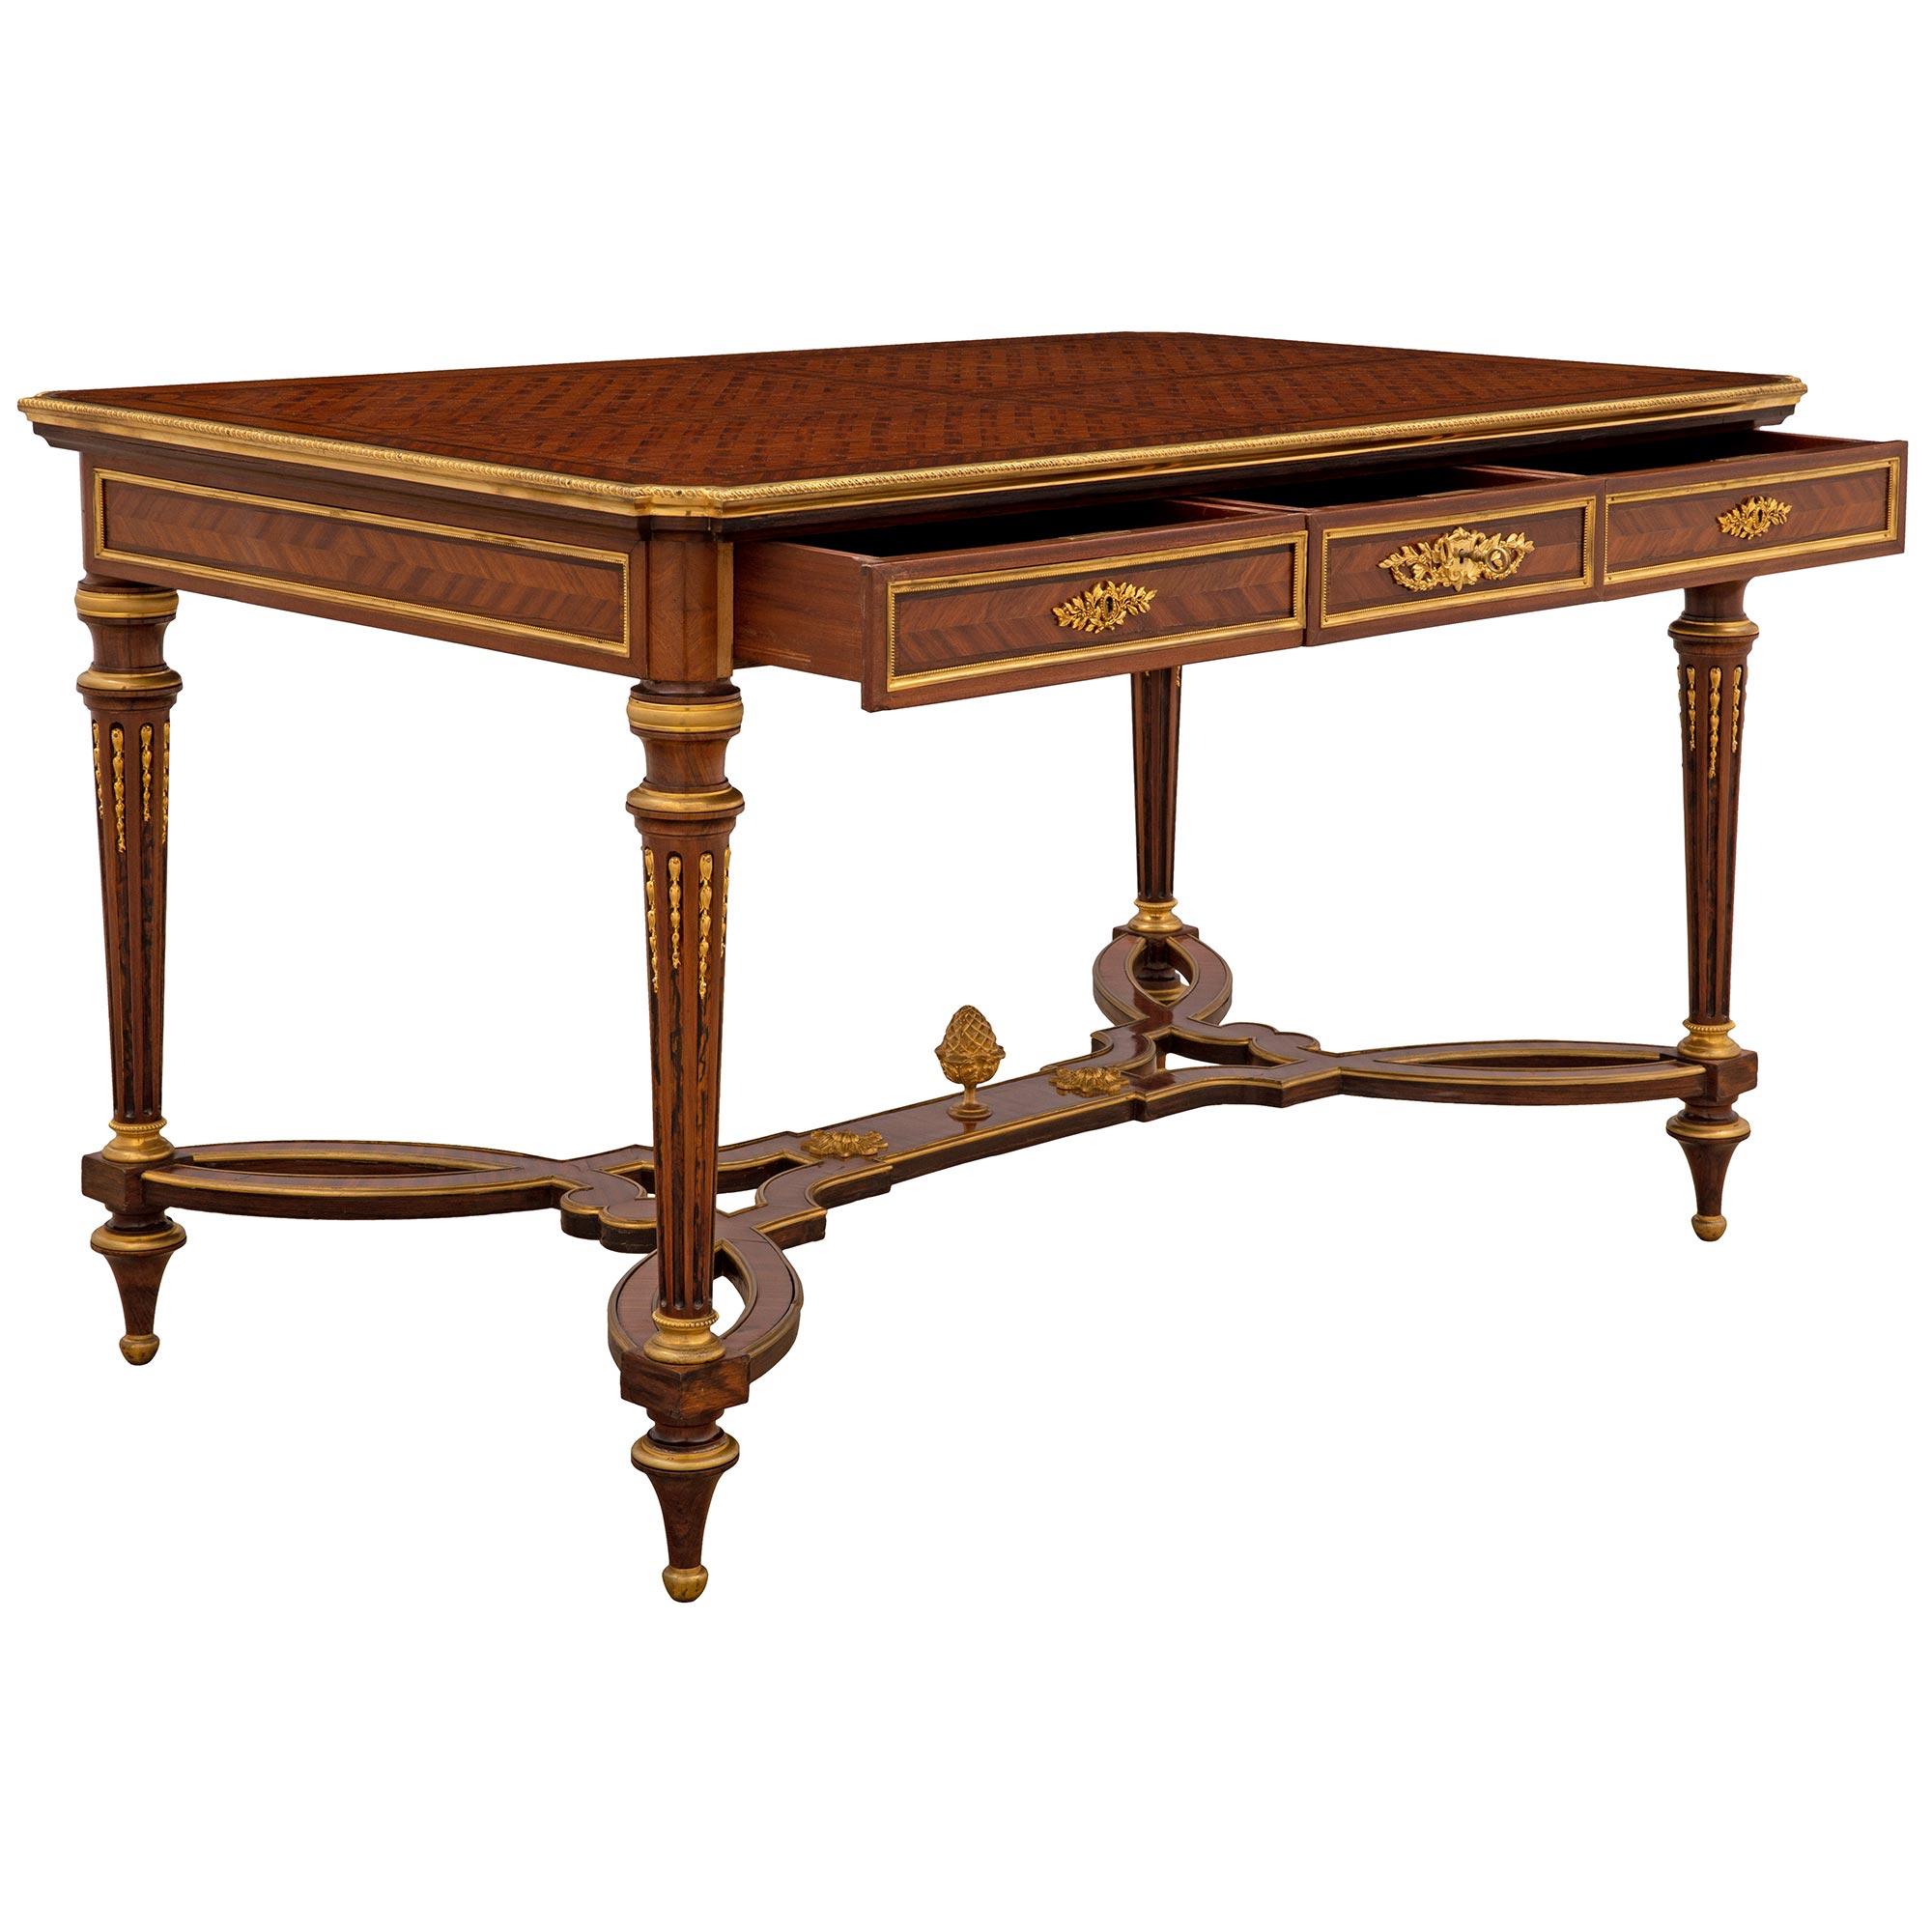 French 19th Century Louis XVI Style Tulipwood and Ormolu Center Table For Sale 2